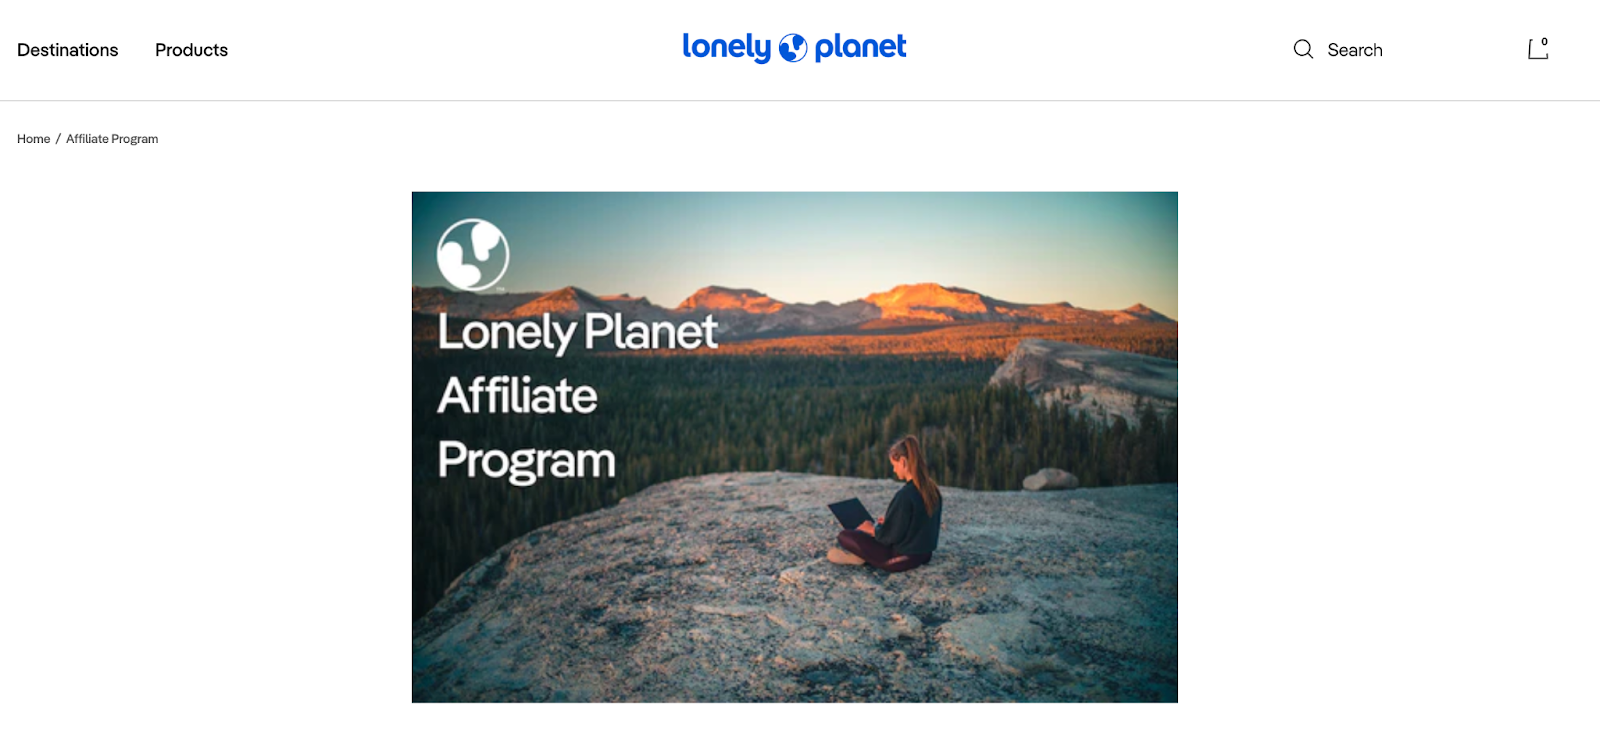 Lonely planet Affiliate program page